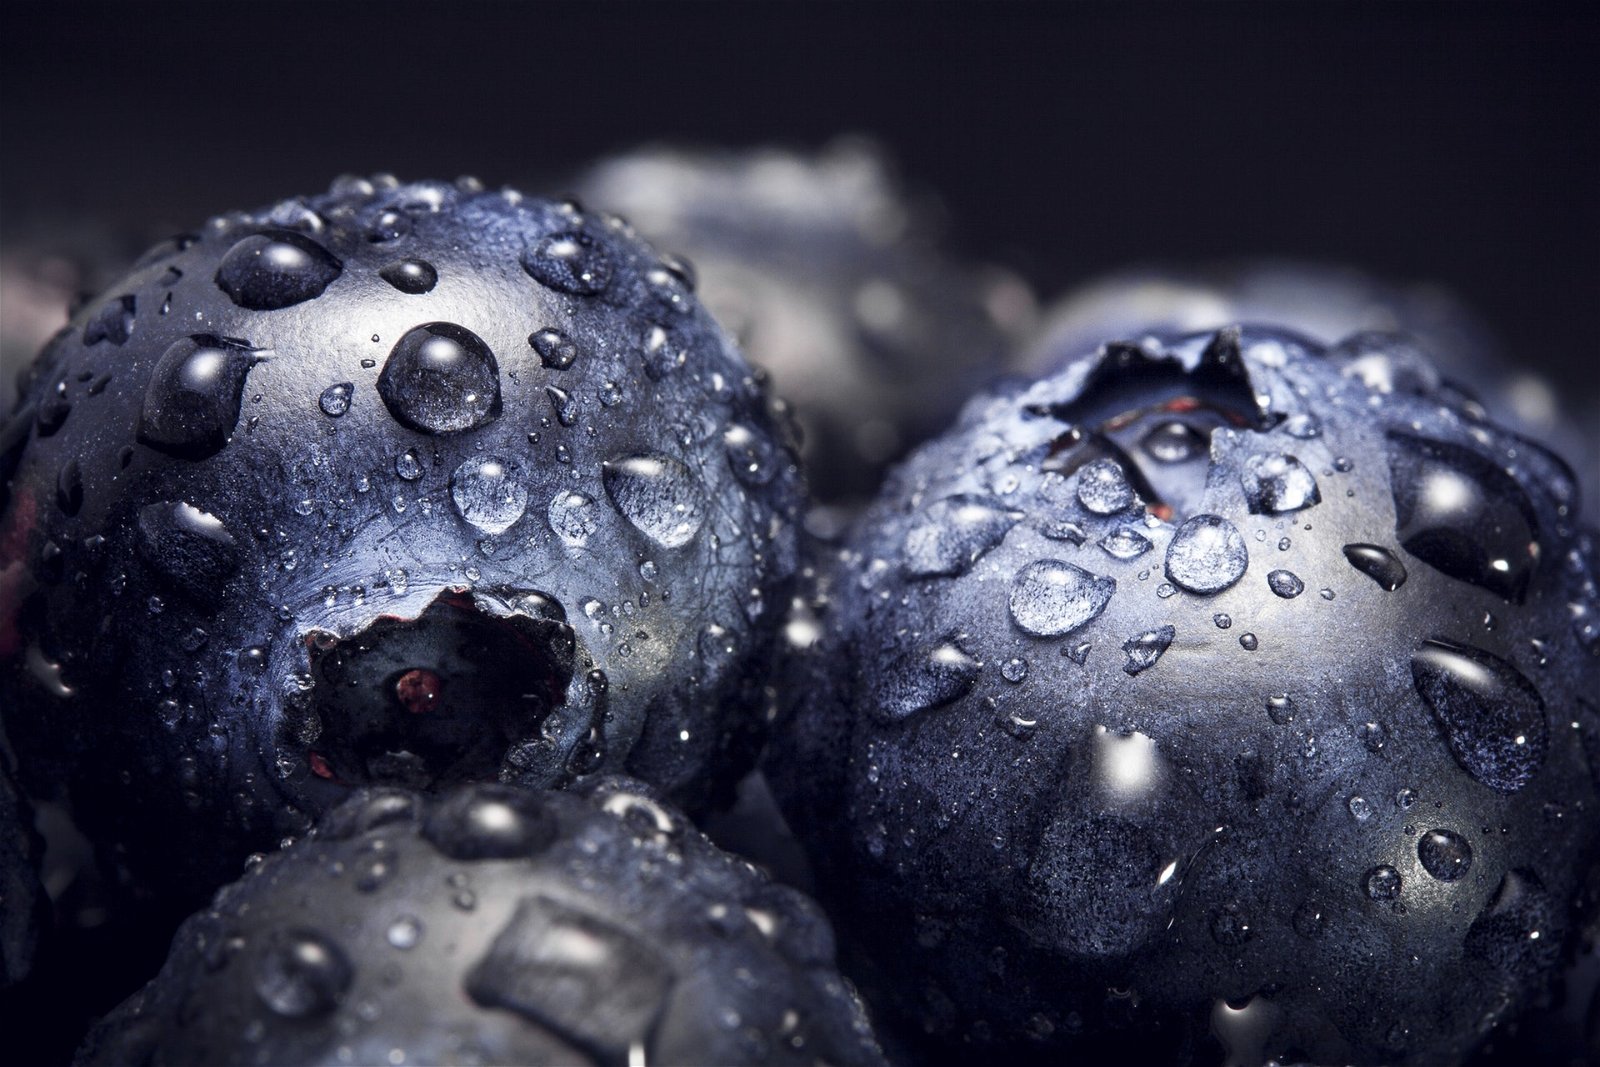 Settings for Macro Photography: Close-up image of blueberries with water droplets lit with flash